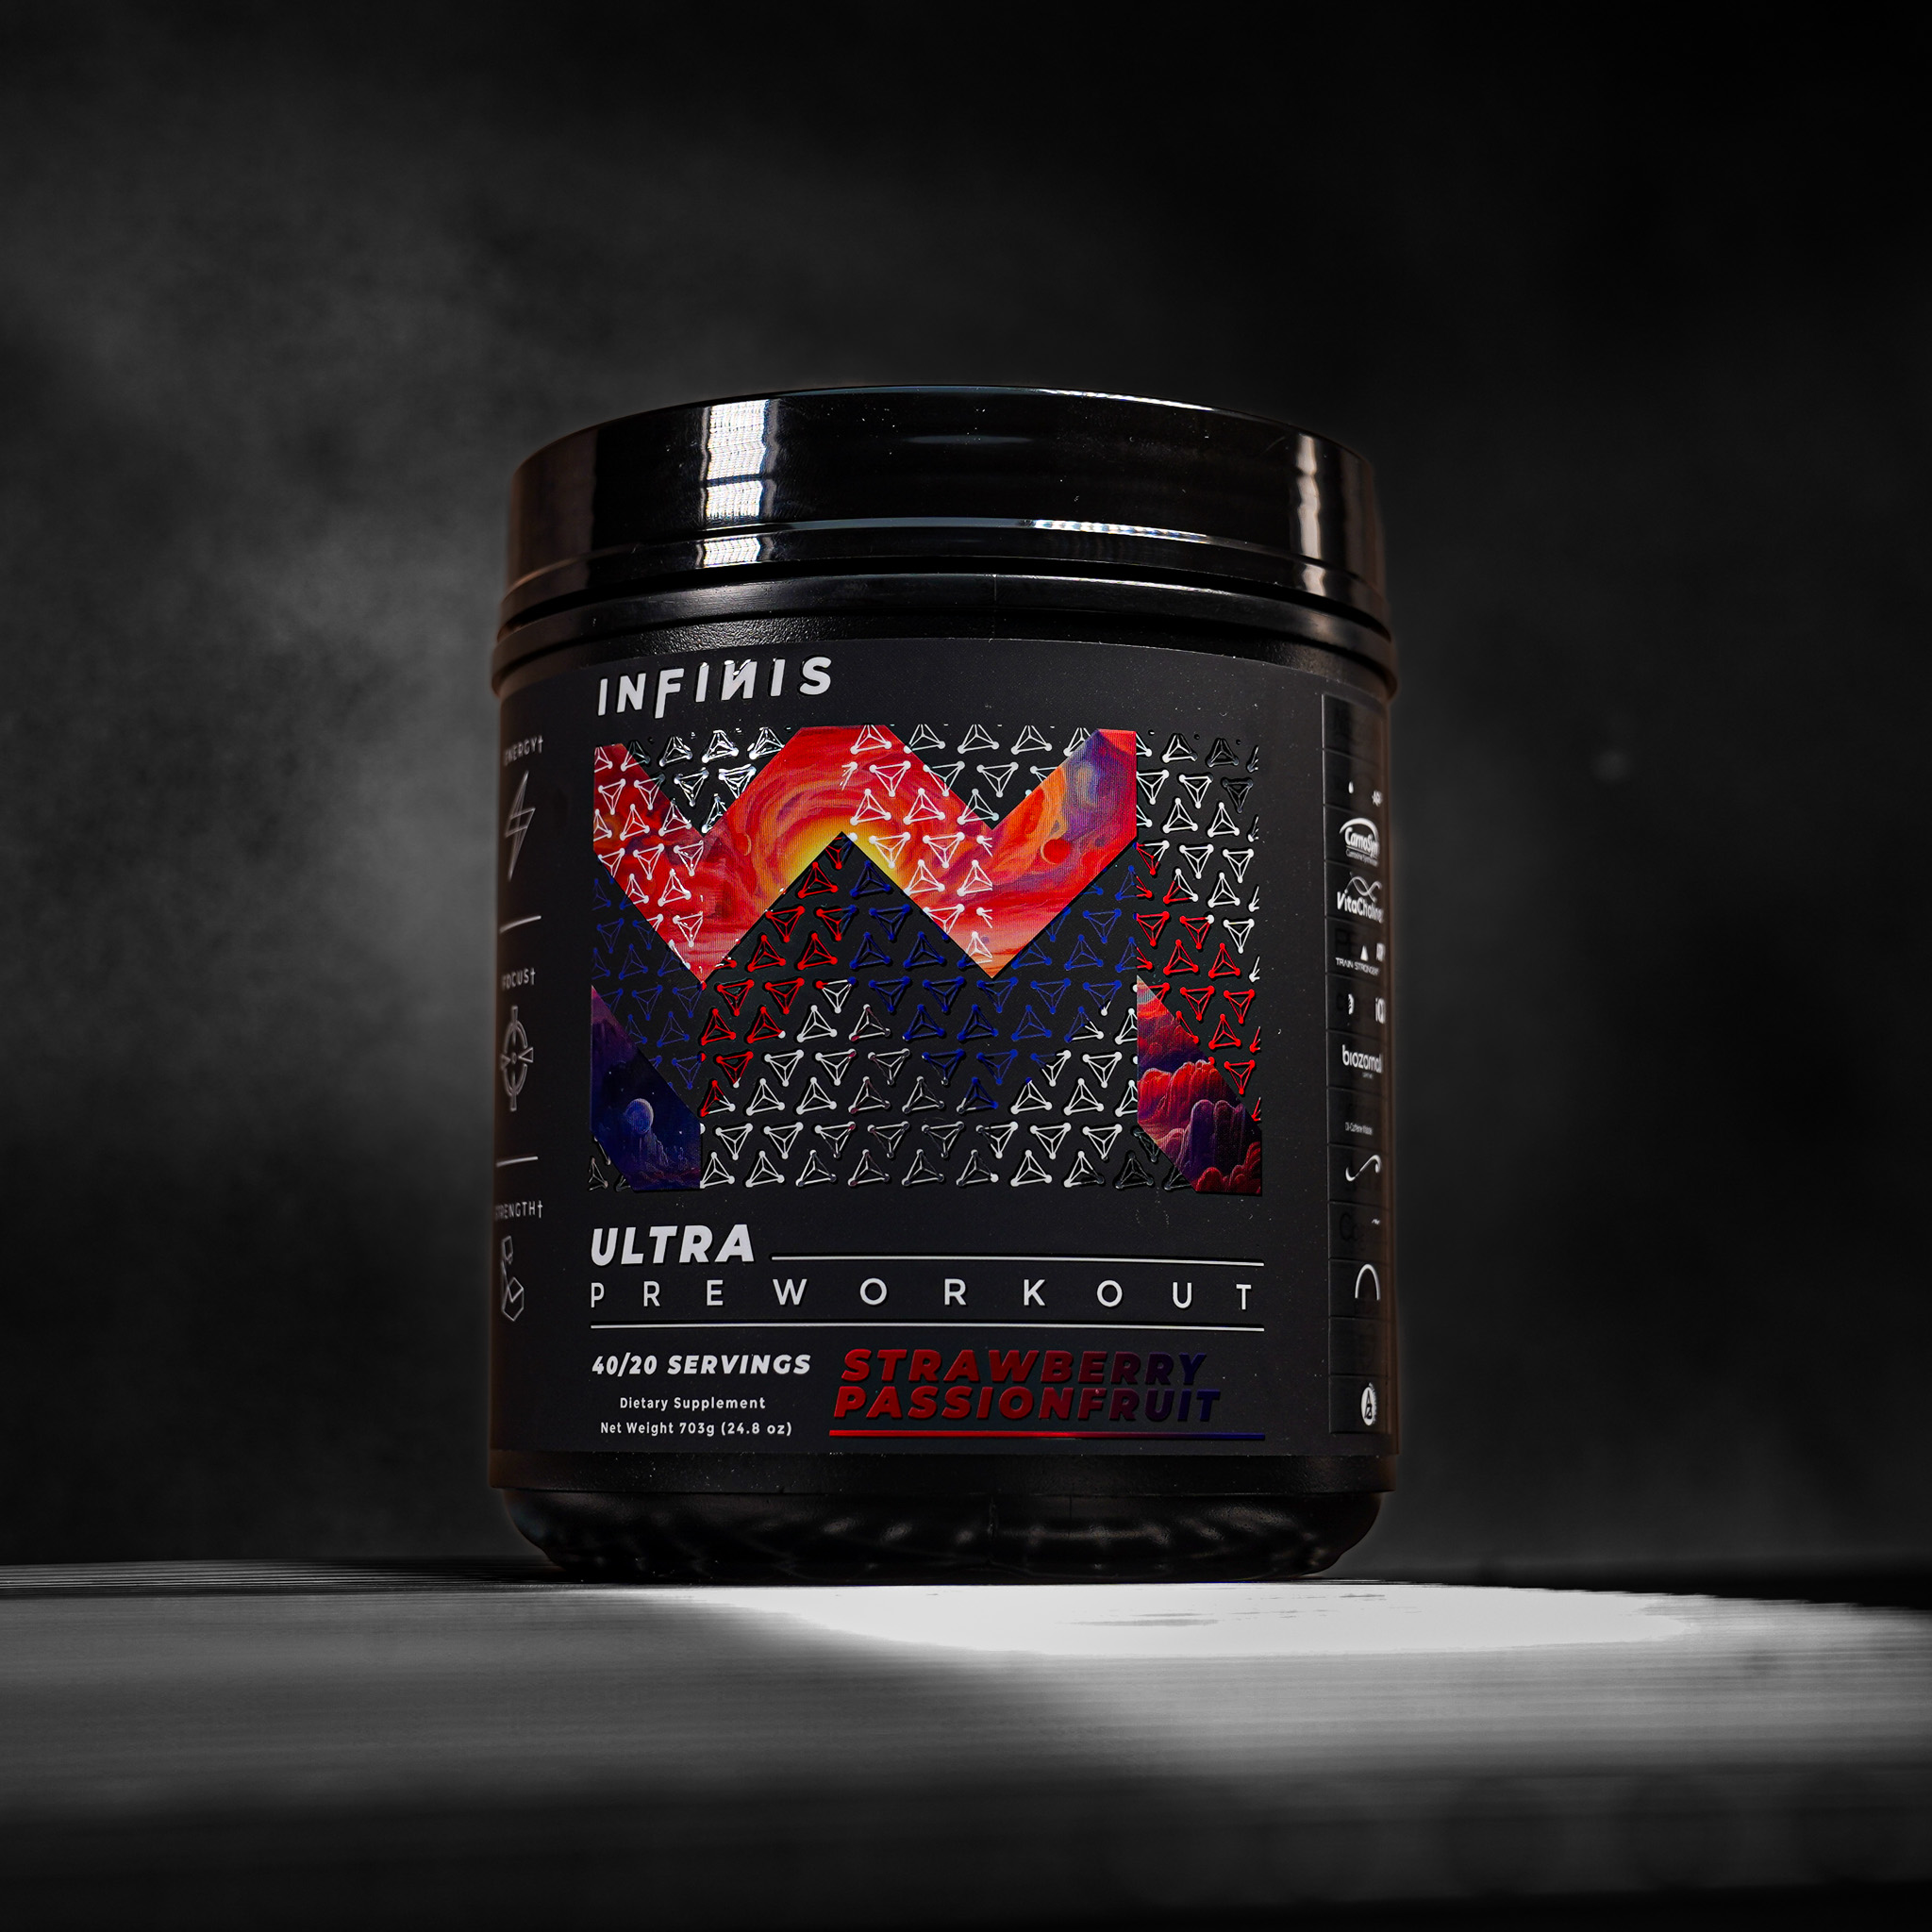 Infinis Ultra Preworkout Strawberry Passionfruit